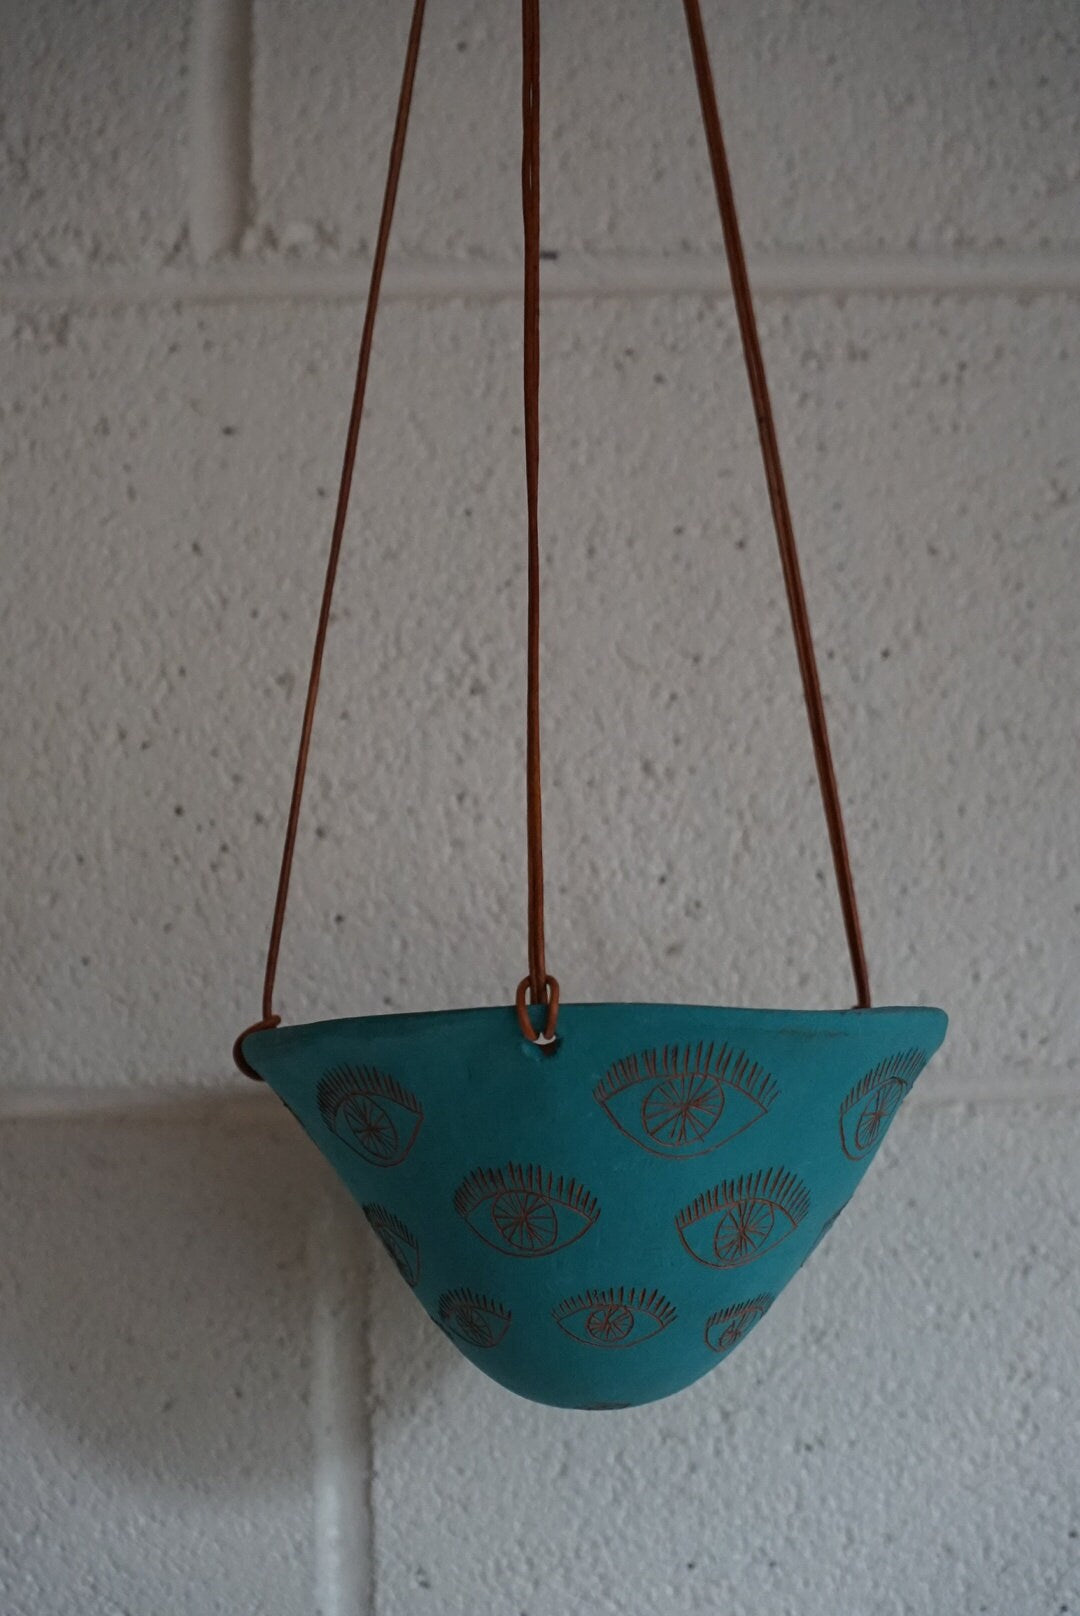 Teal & Terracotta Hanging Planter w/ "Eye" Design - Hanging Pot with Carved Design - Succulent, Cactus, Herb, Air Plant, Etc